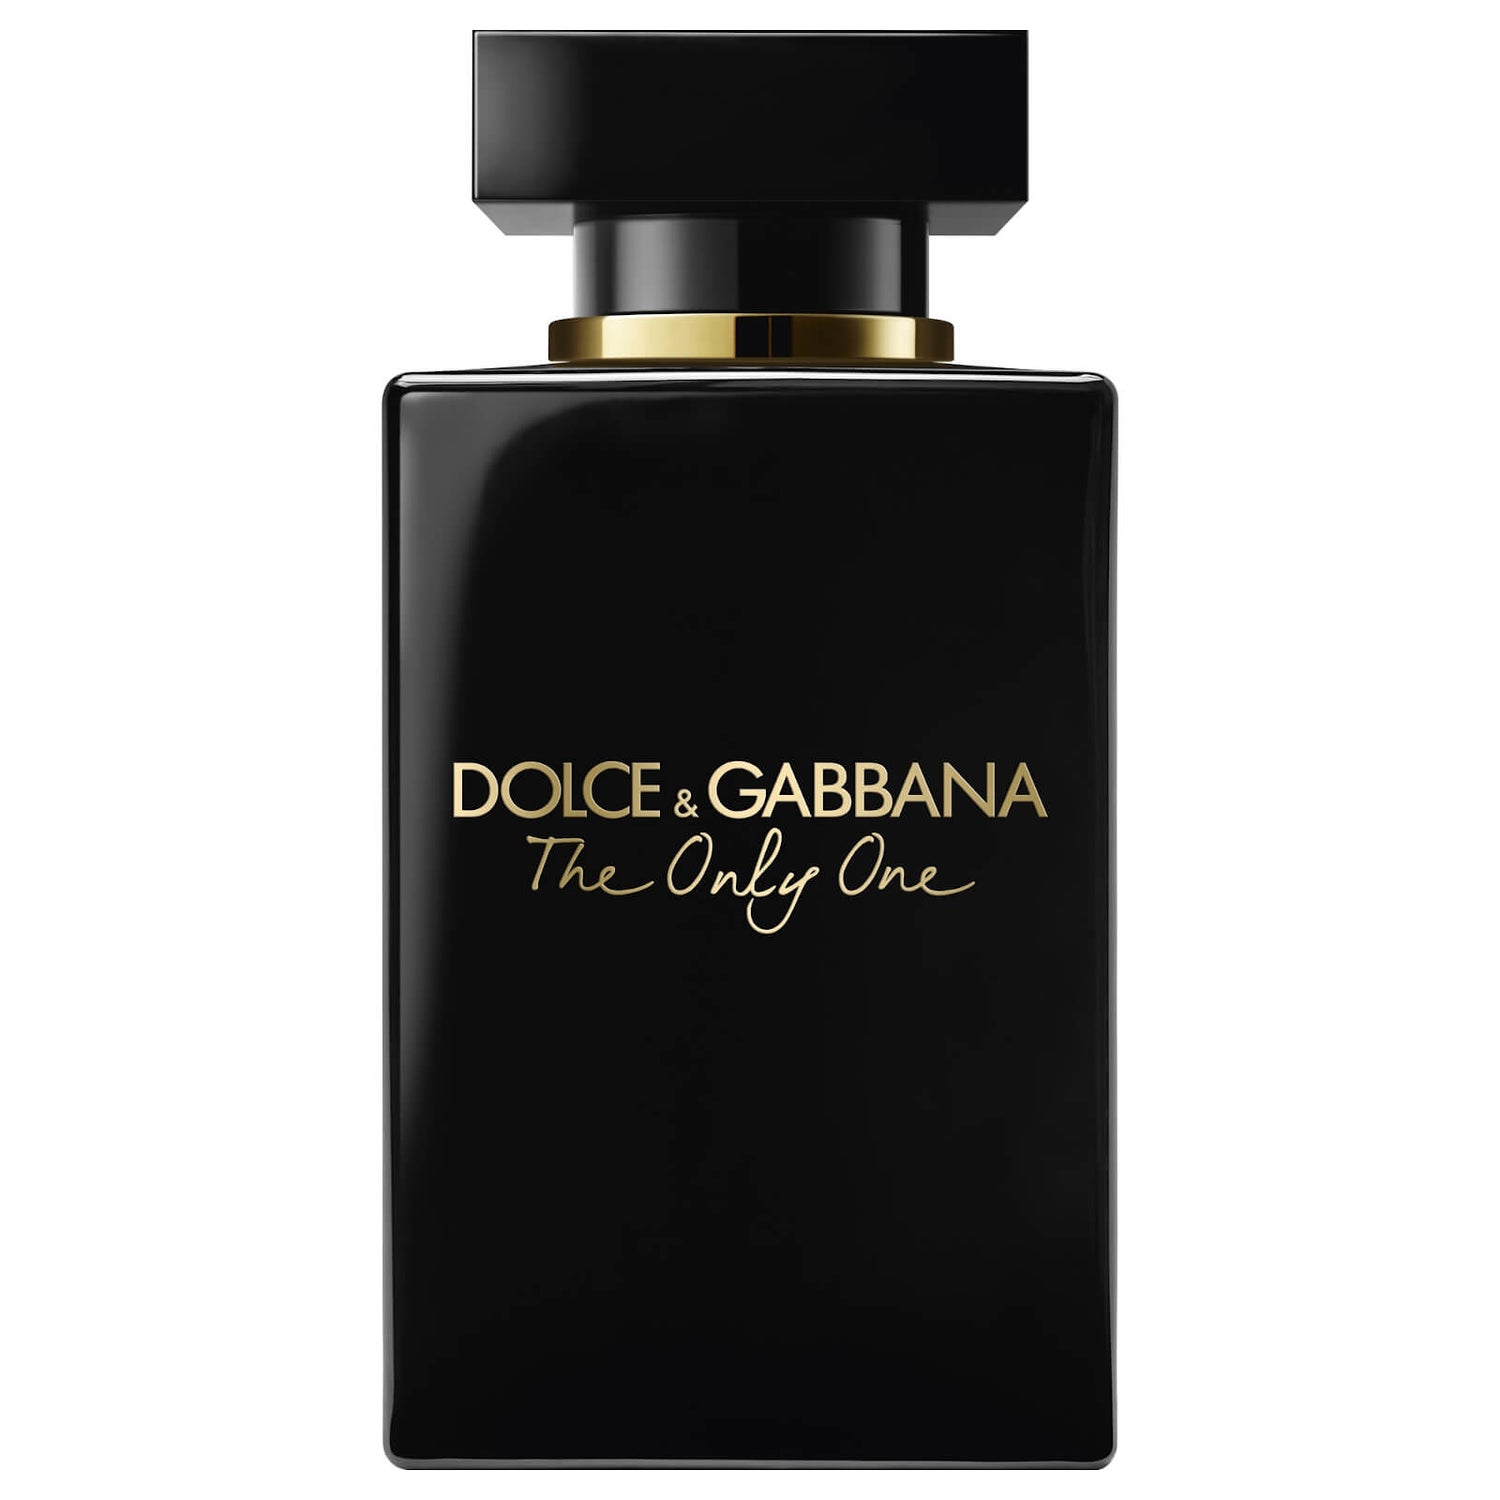 Духи dolce only one. Dolce&Gabbana the only one intense 50 ml. Dolce Gabbana the only one 30 мл. Дольче Габбана the only one женские 30 мл. Dolce and Gabbana "the only one", 100 ml (Luxe).